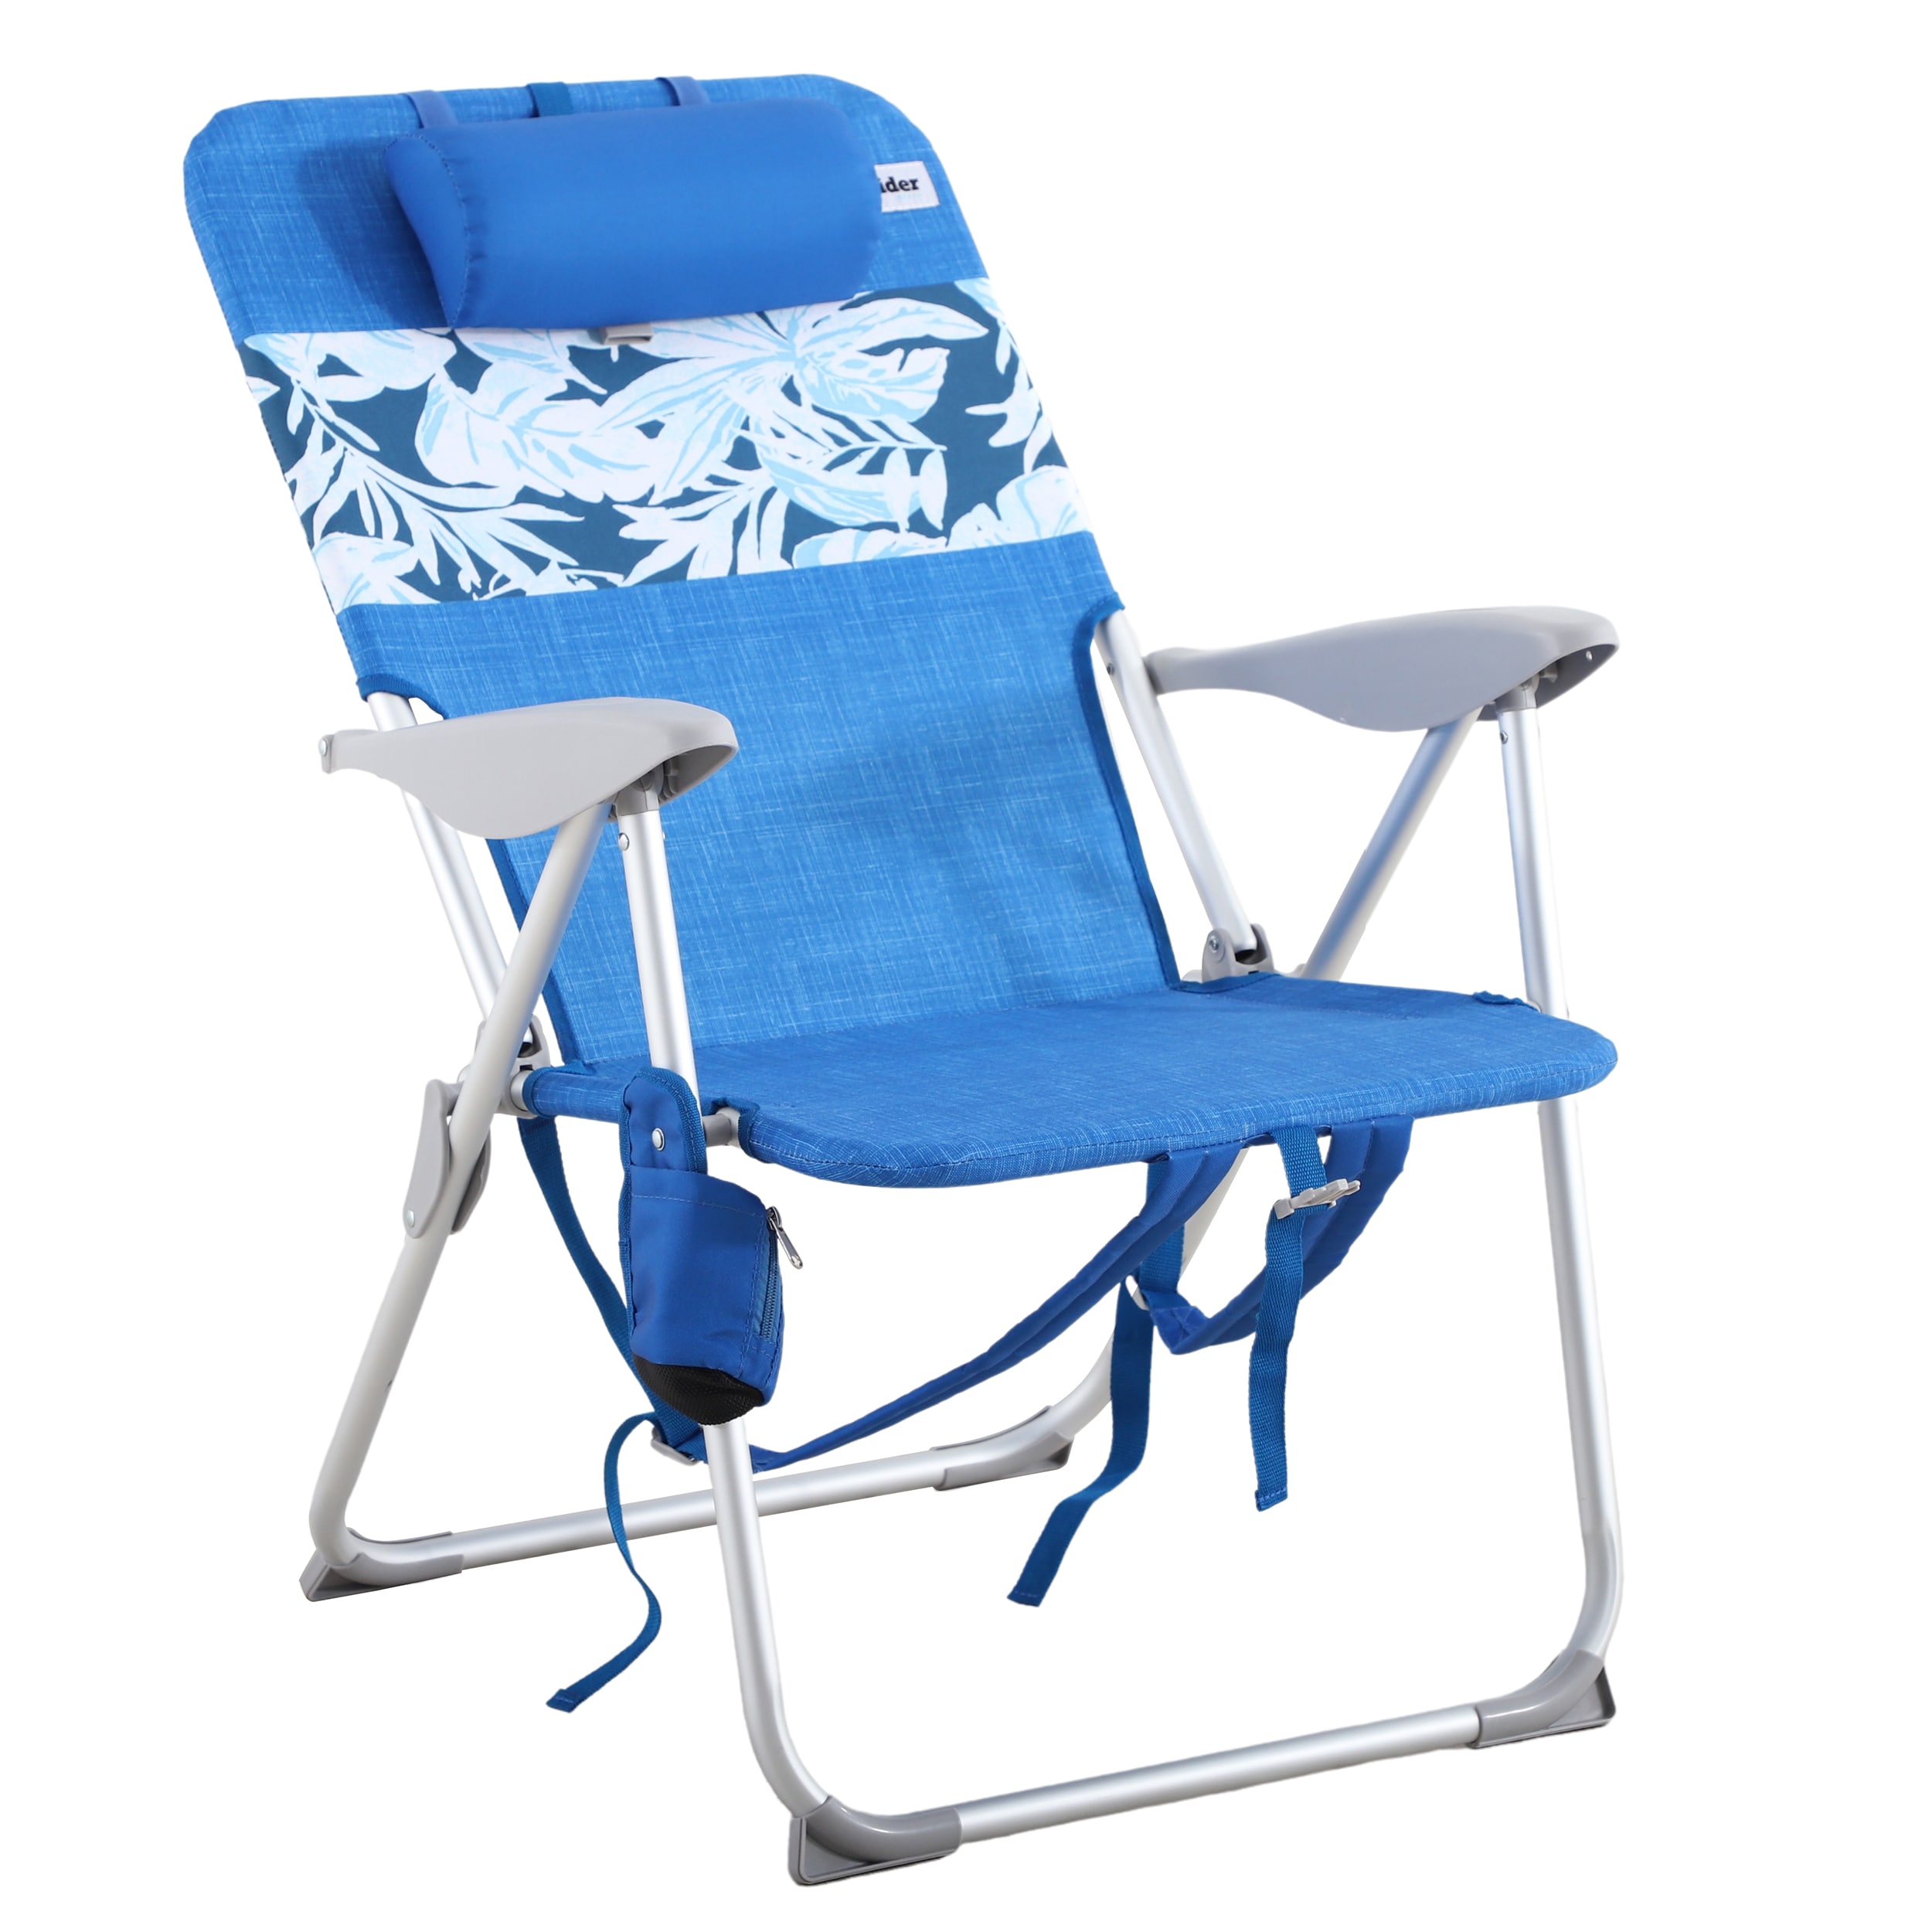 fedme Litteratur Lager Outsider Blue Folding Beach Chair in the Beach & Camping Chairs department  at Lowes.com